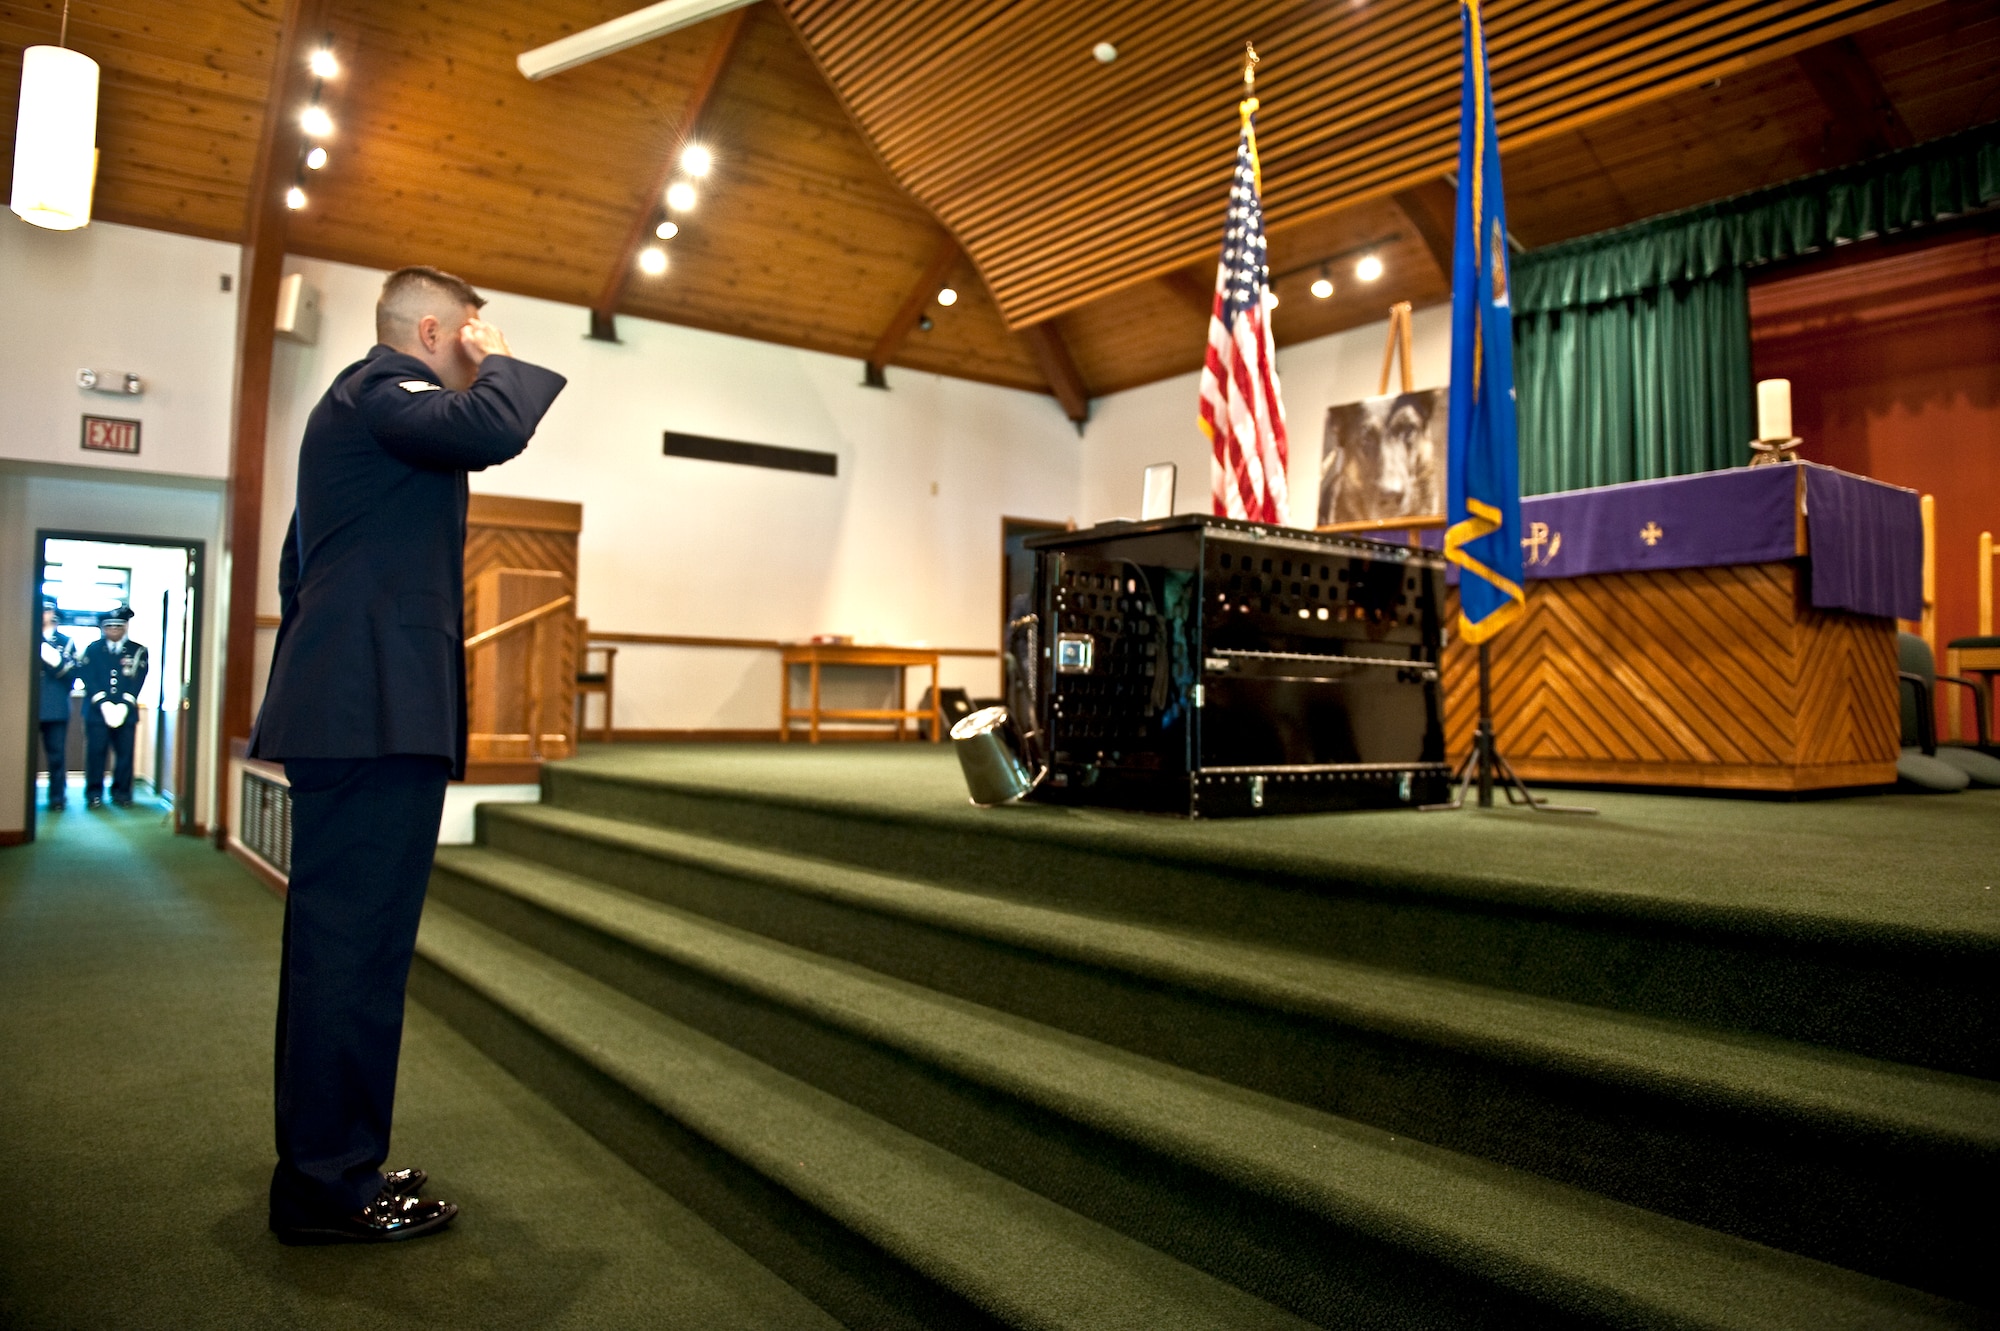 Staff Sgt. Robert Calhoun, a military working dog from the 1st Special Operations Security Forces Squadron, salutes a memorial display set up in honor of Rony, a deceased MWD, during a ceremony at the base chapel on Hurlburt Field, Fla., March 16, 2012. Calhoun and Rony worked together on deployments to Iraq and Afghanistan during a two-and-a-half year period. (U.S. Air Force photo/Airman 1st Class Christopher Williams)(Released)